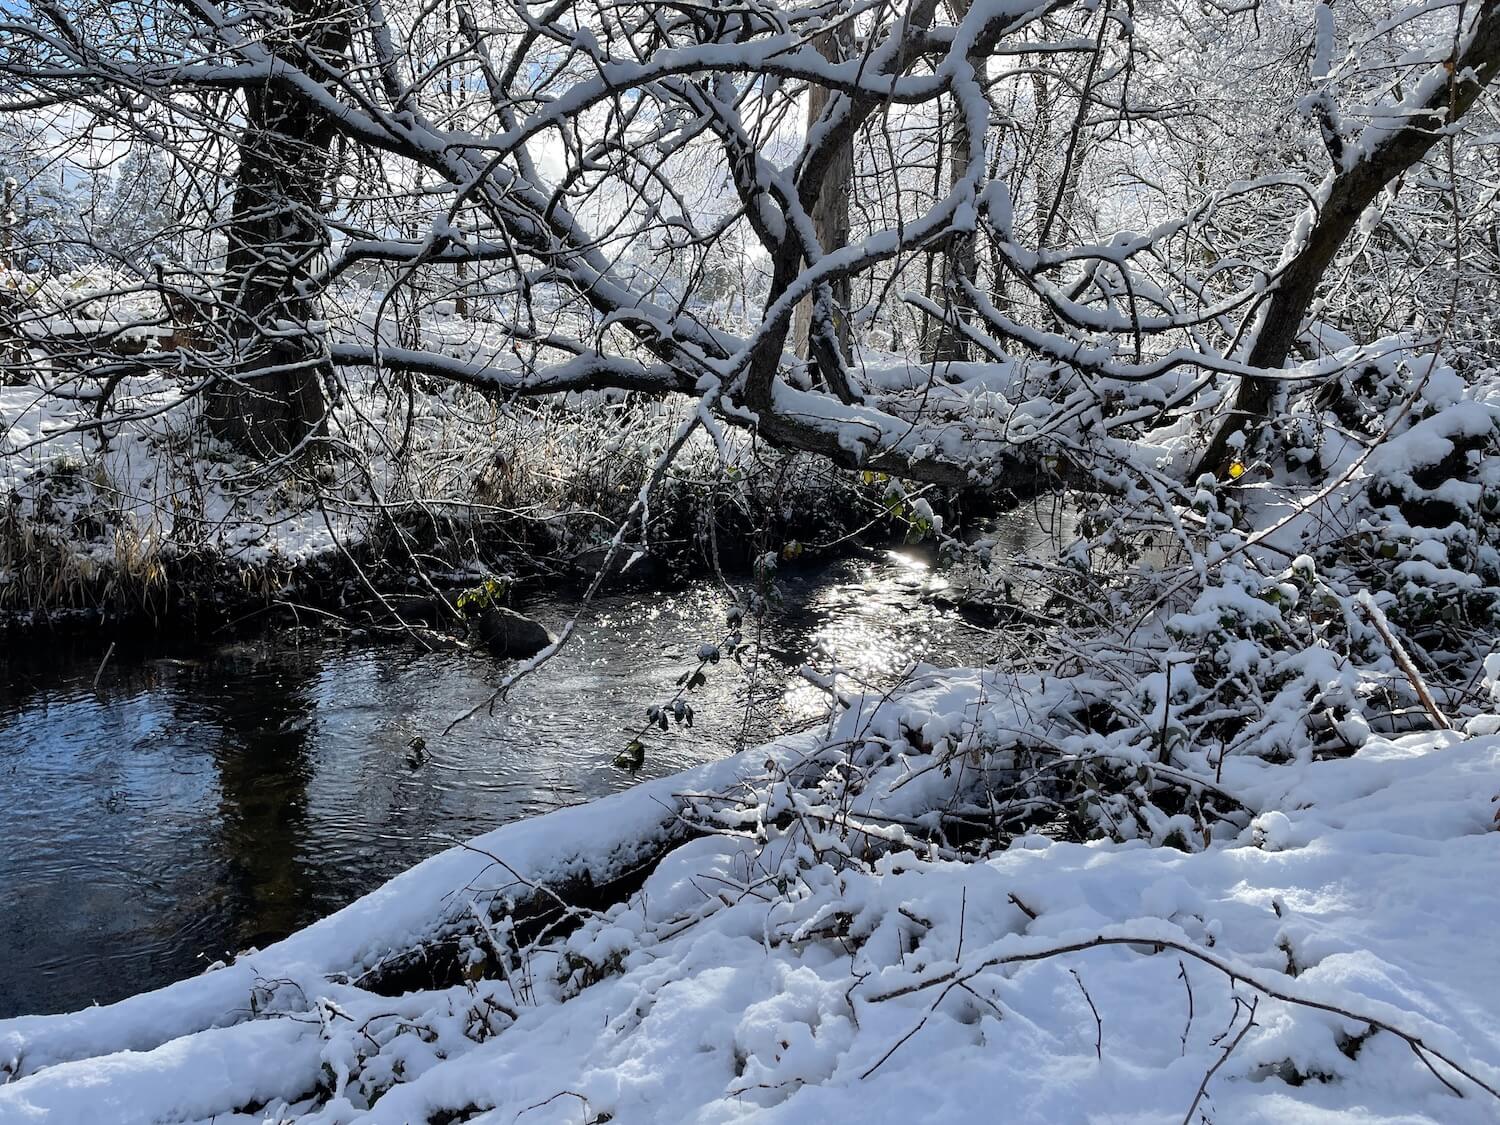 A view of a creek with snow clinging to branches around it and a pasture in the background.